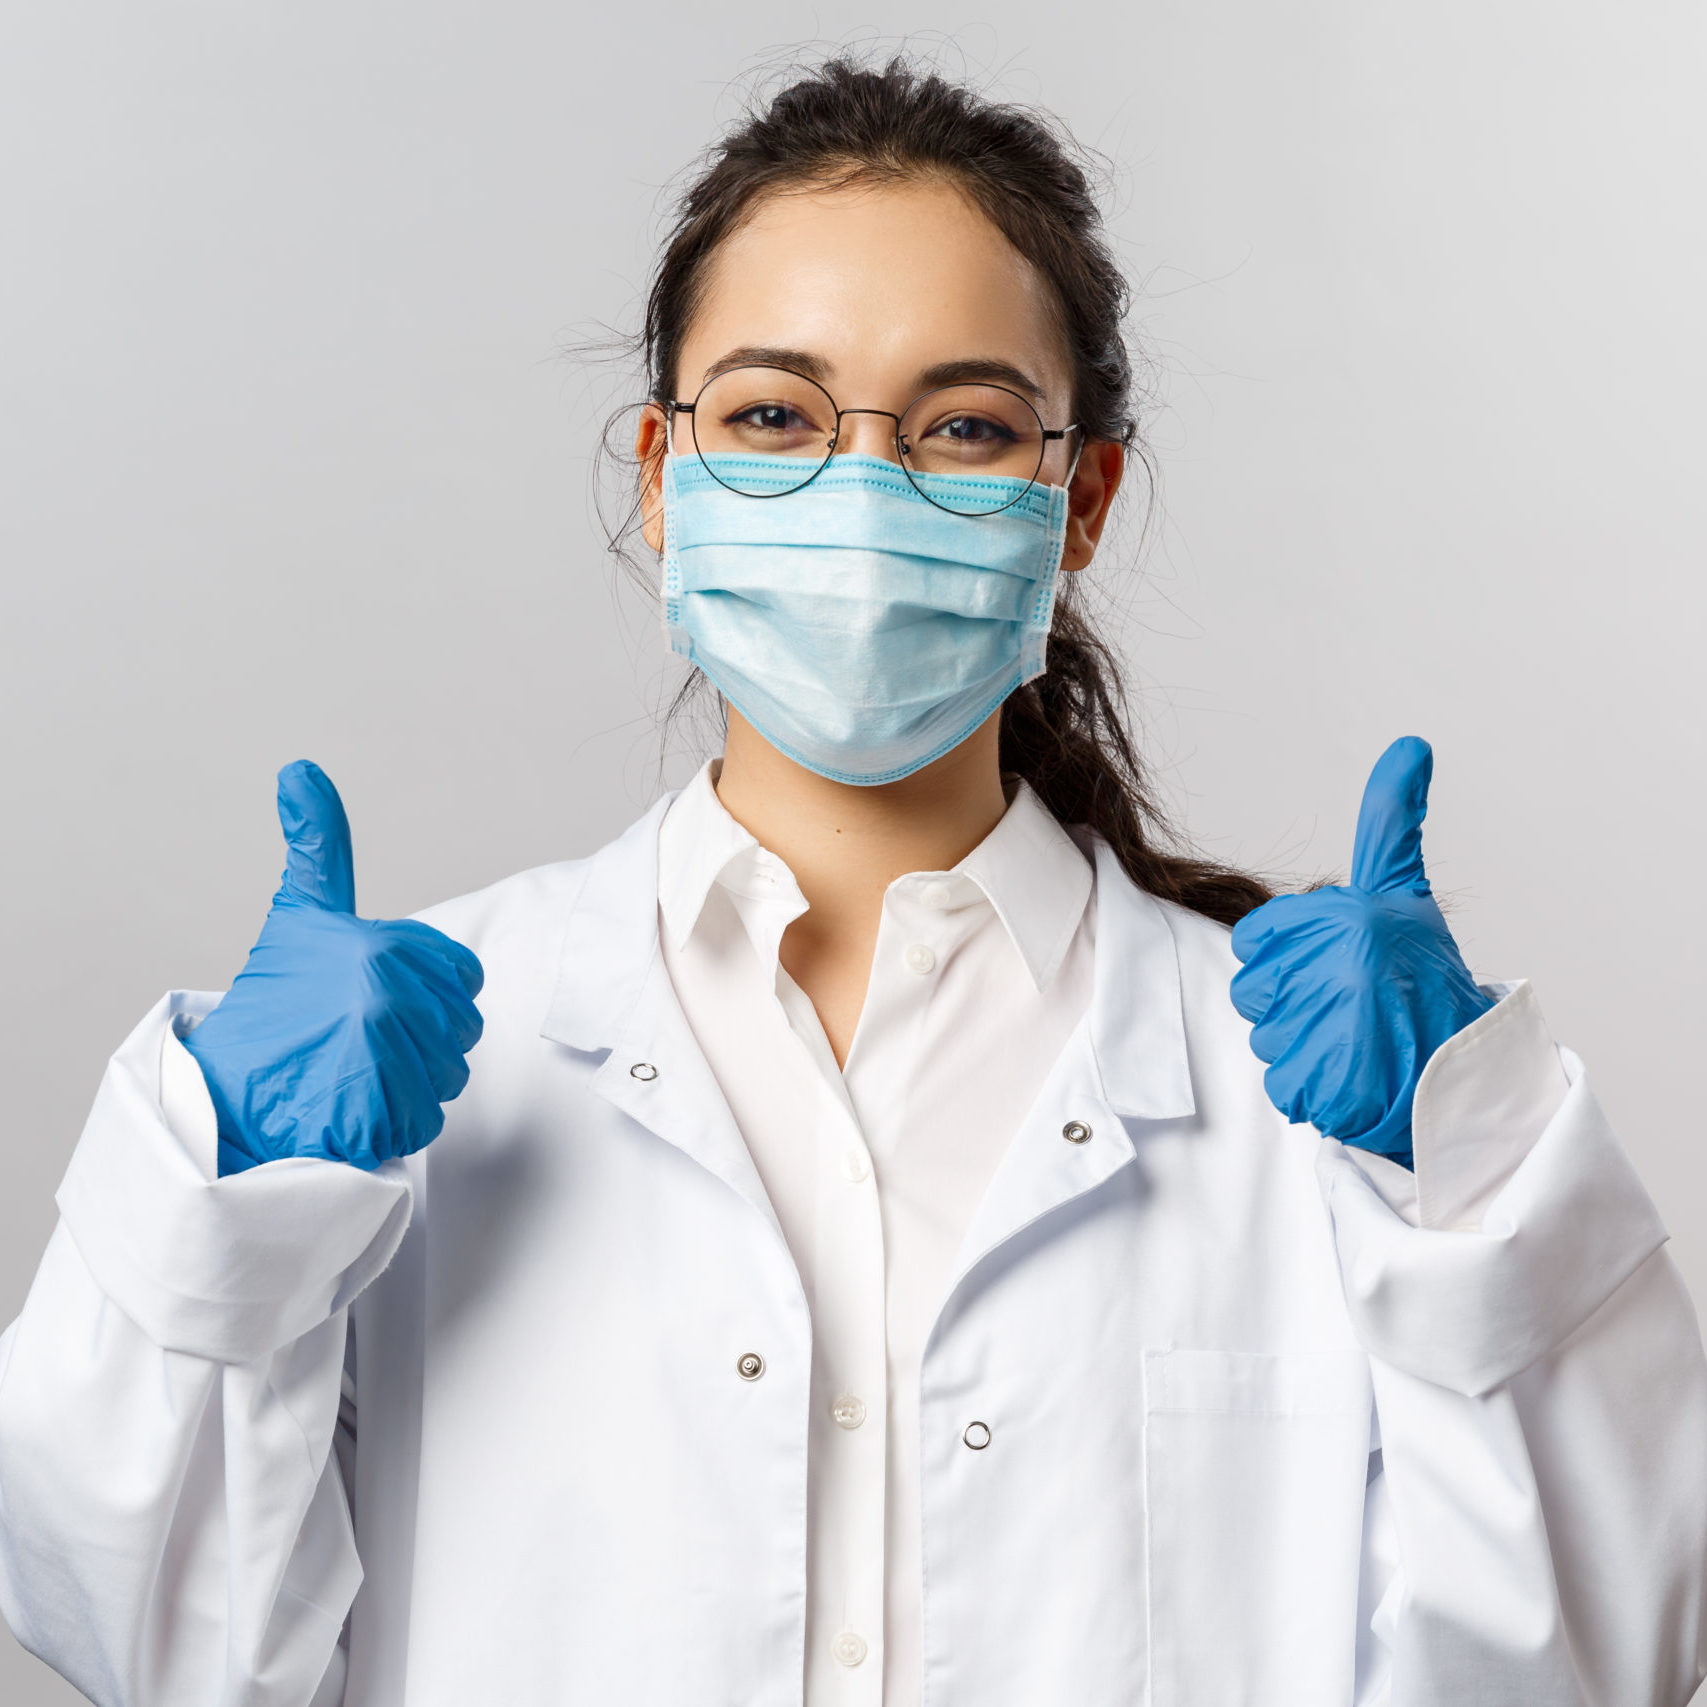 Doctors, infectionist, research and covid19 concept. Satisfied young asian female doctor receive good results on studying virus, discover vaccine, show thumb-up, wear face mask and gloves.